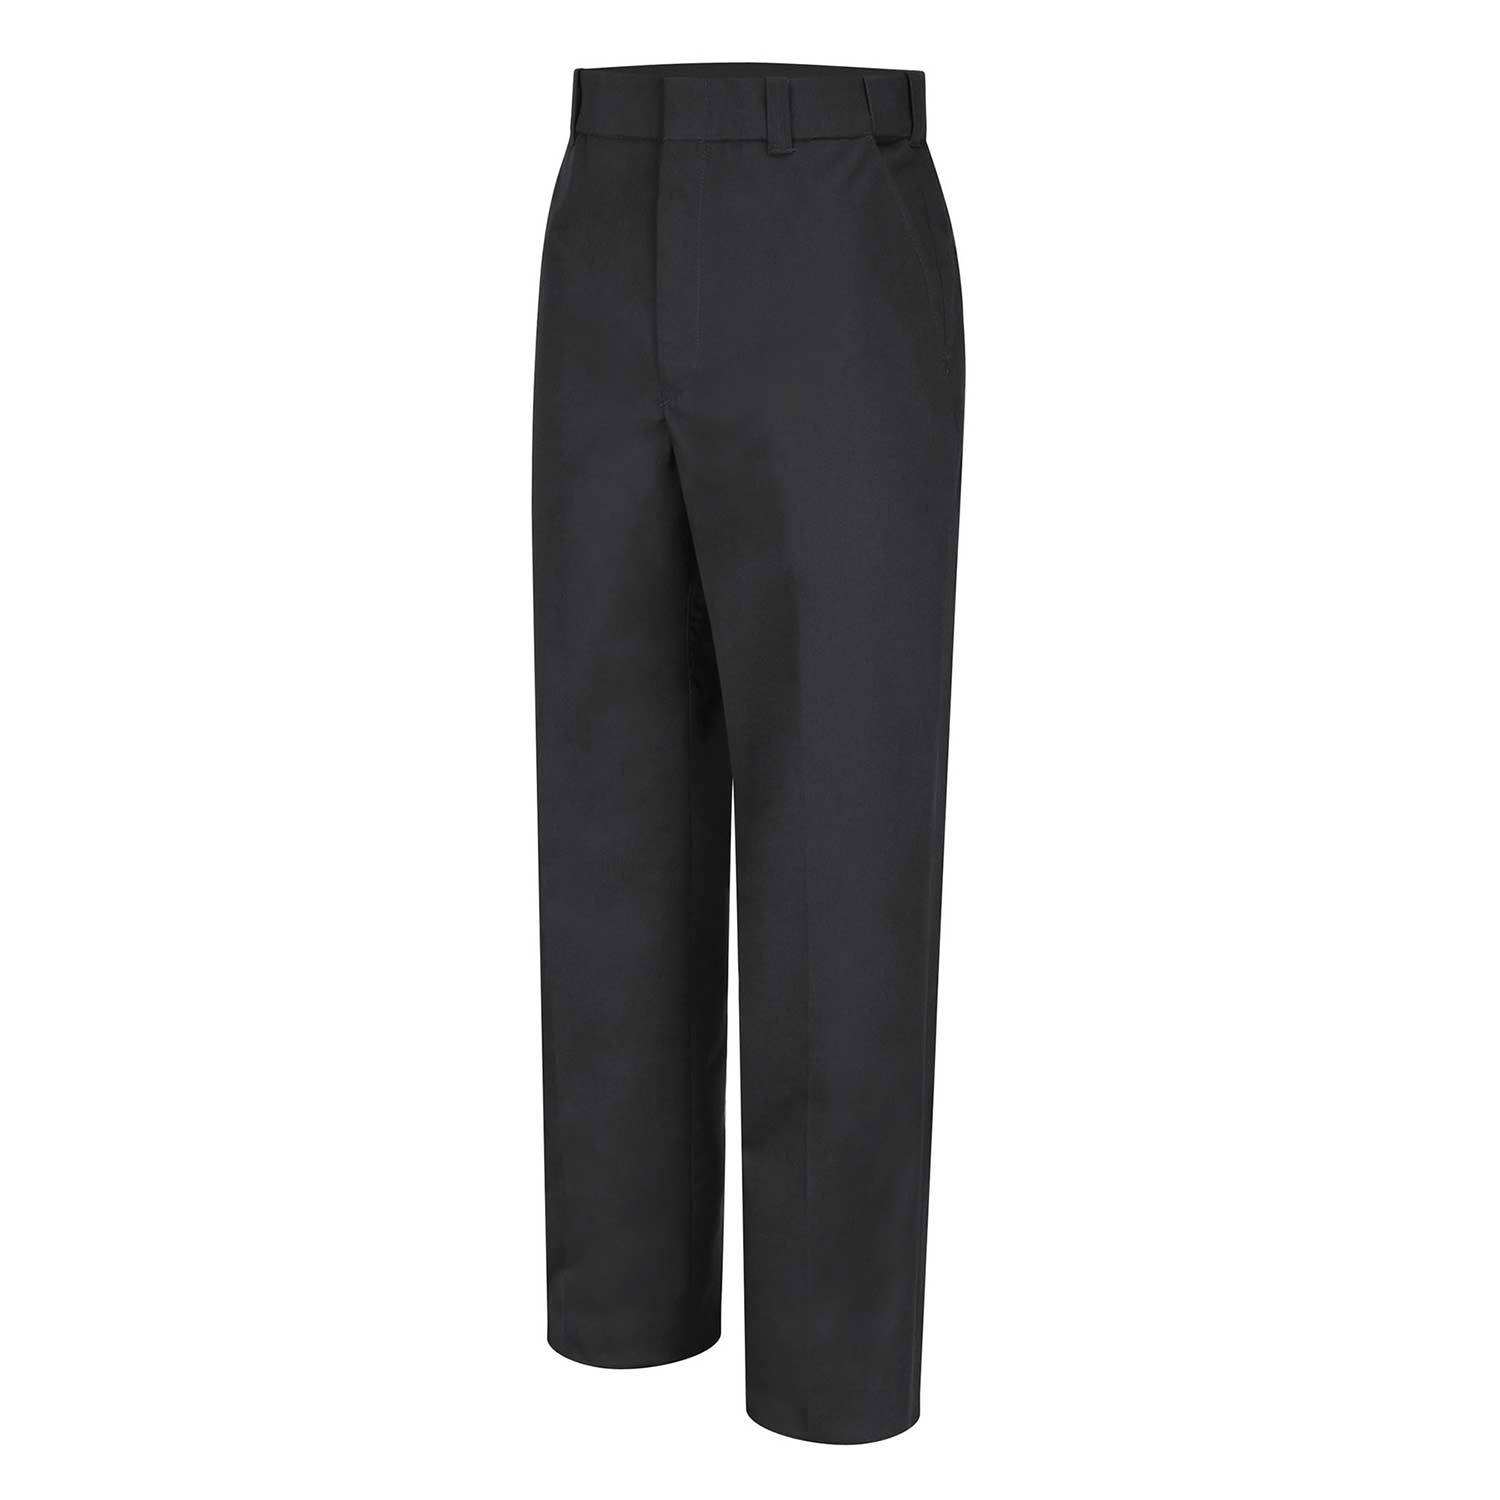 HORACE SMALL WOMEN'S NEW DIMENSION PLUS FOUR POCKET TROUSERS